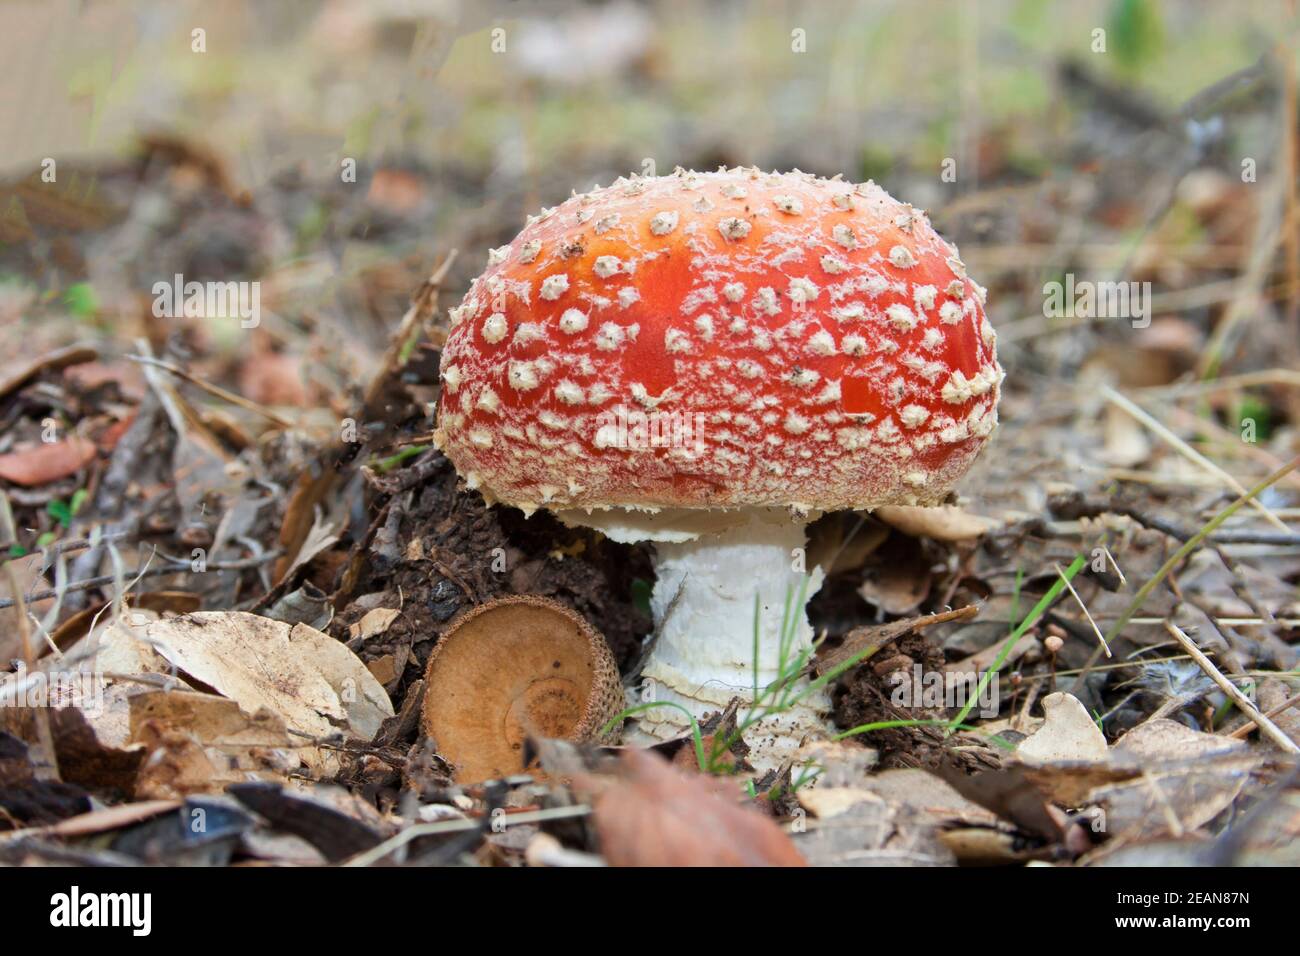 Close-up picture of a Amanita poisonous mushroom in nature Stock Photo